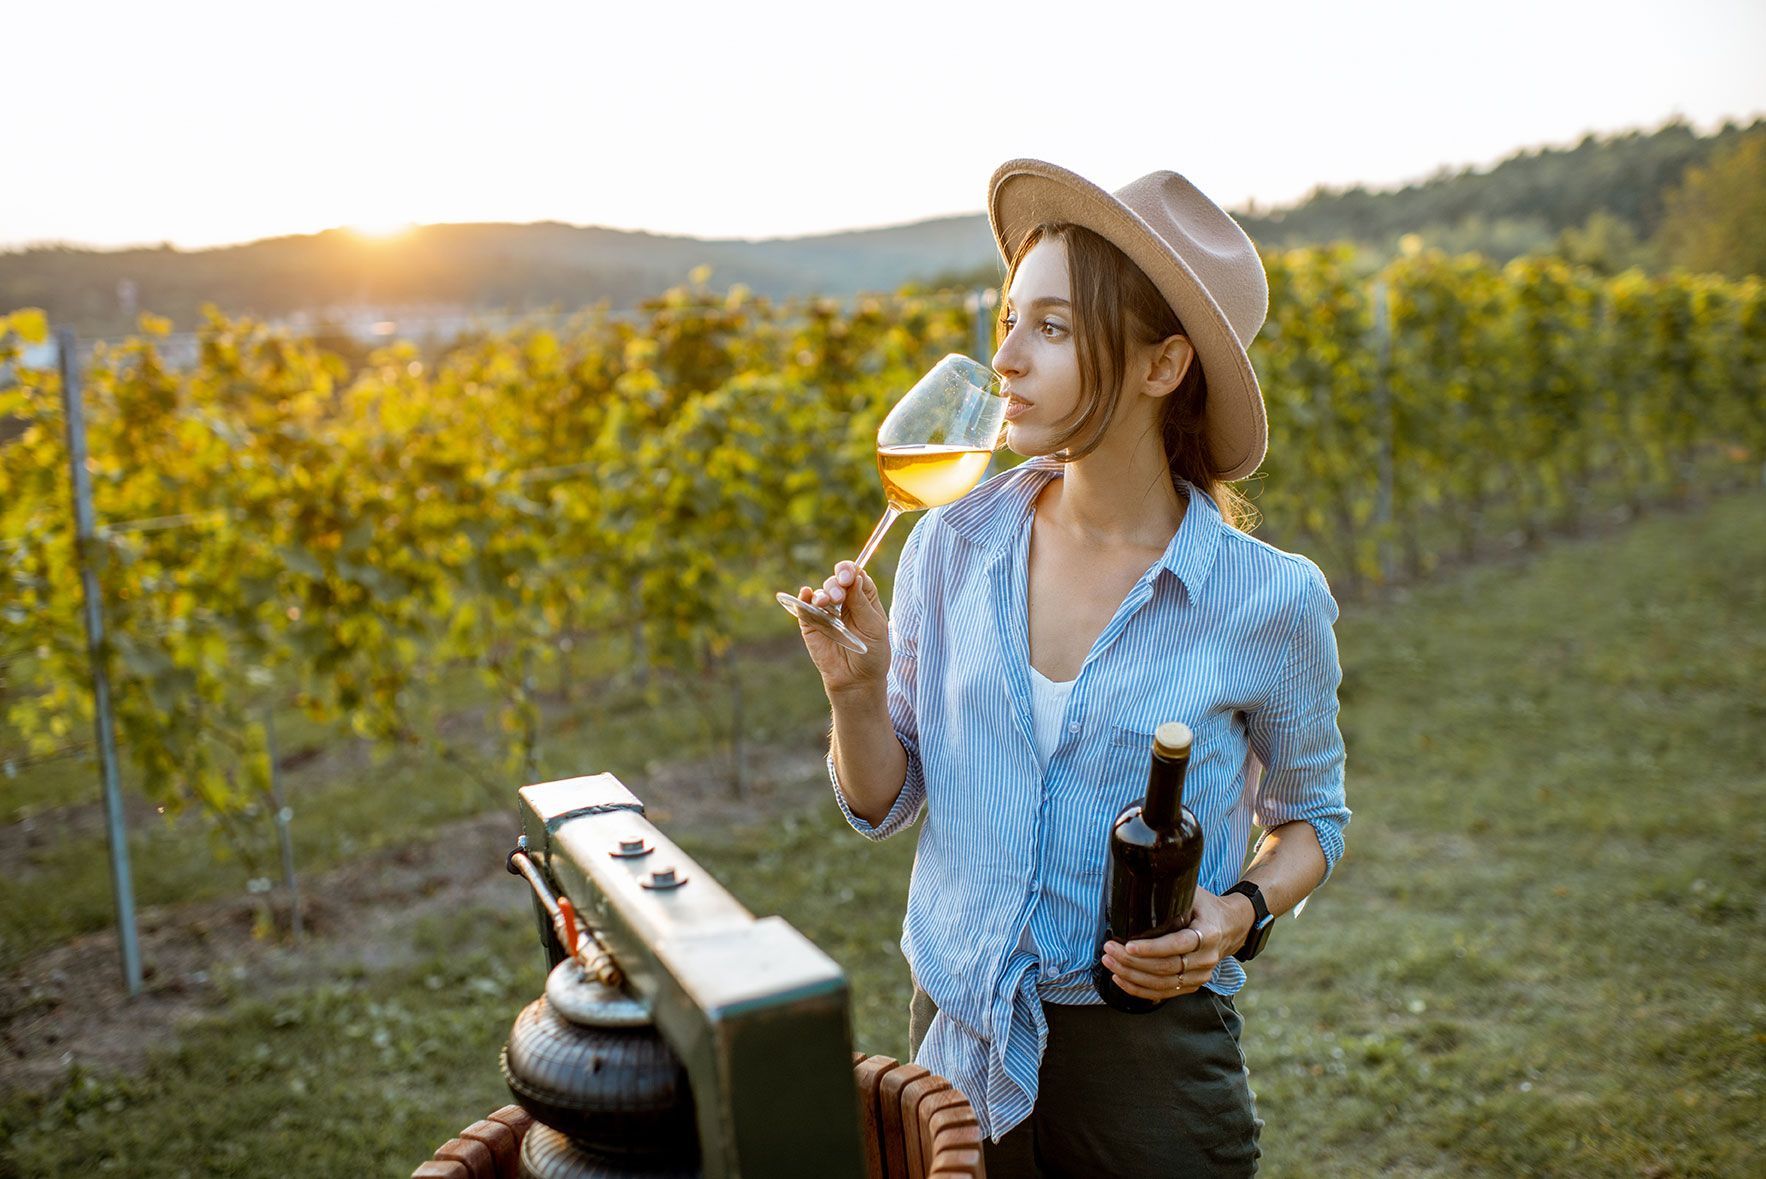 A woman holding a bottle of wine and a glass of wine in vineyard at sunset